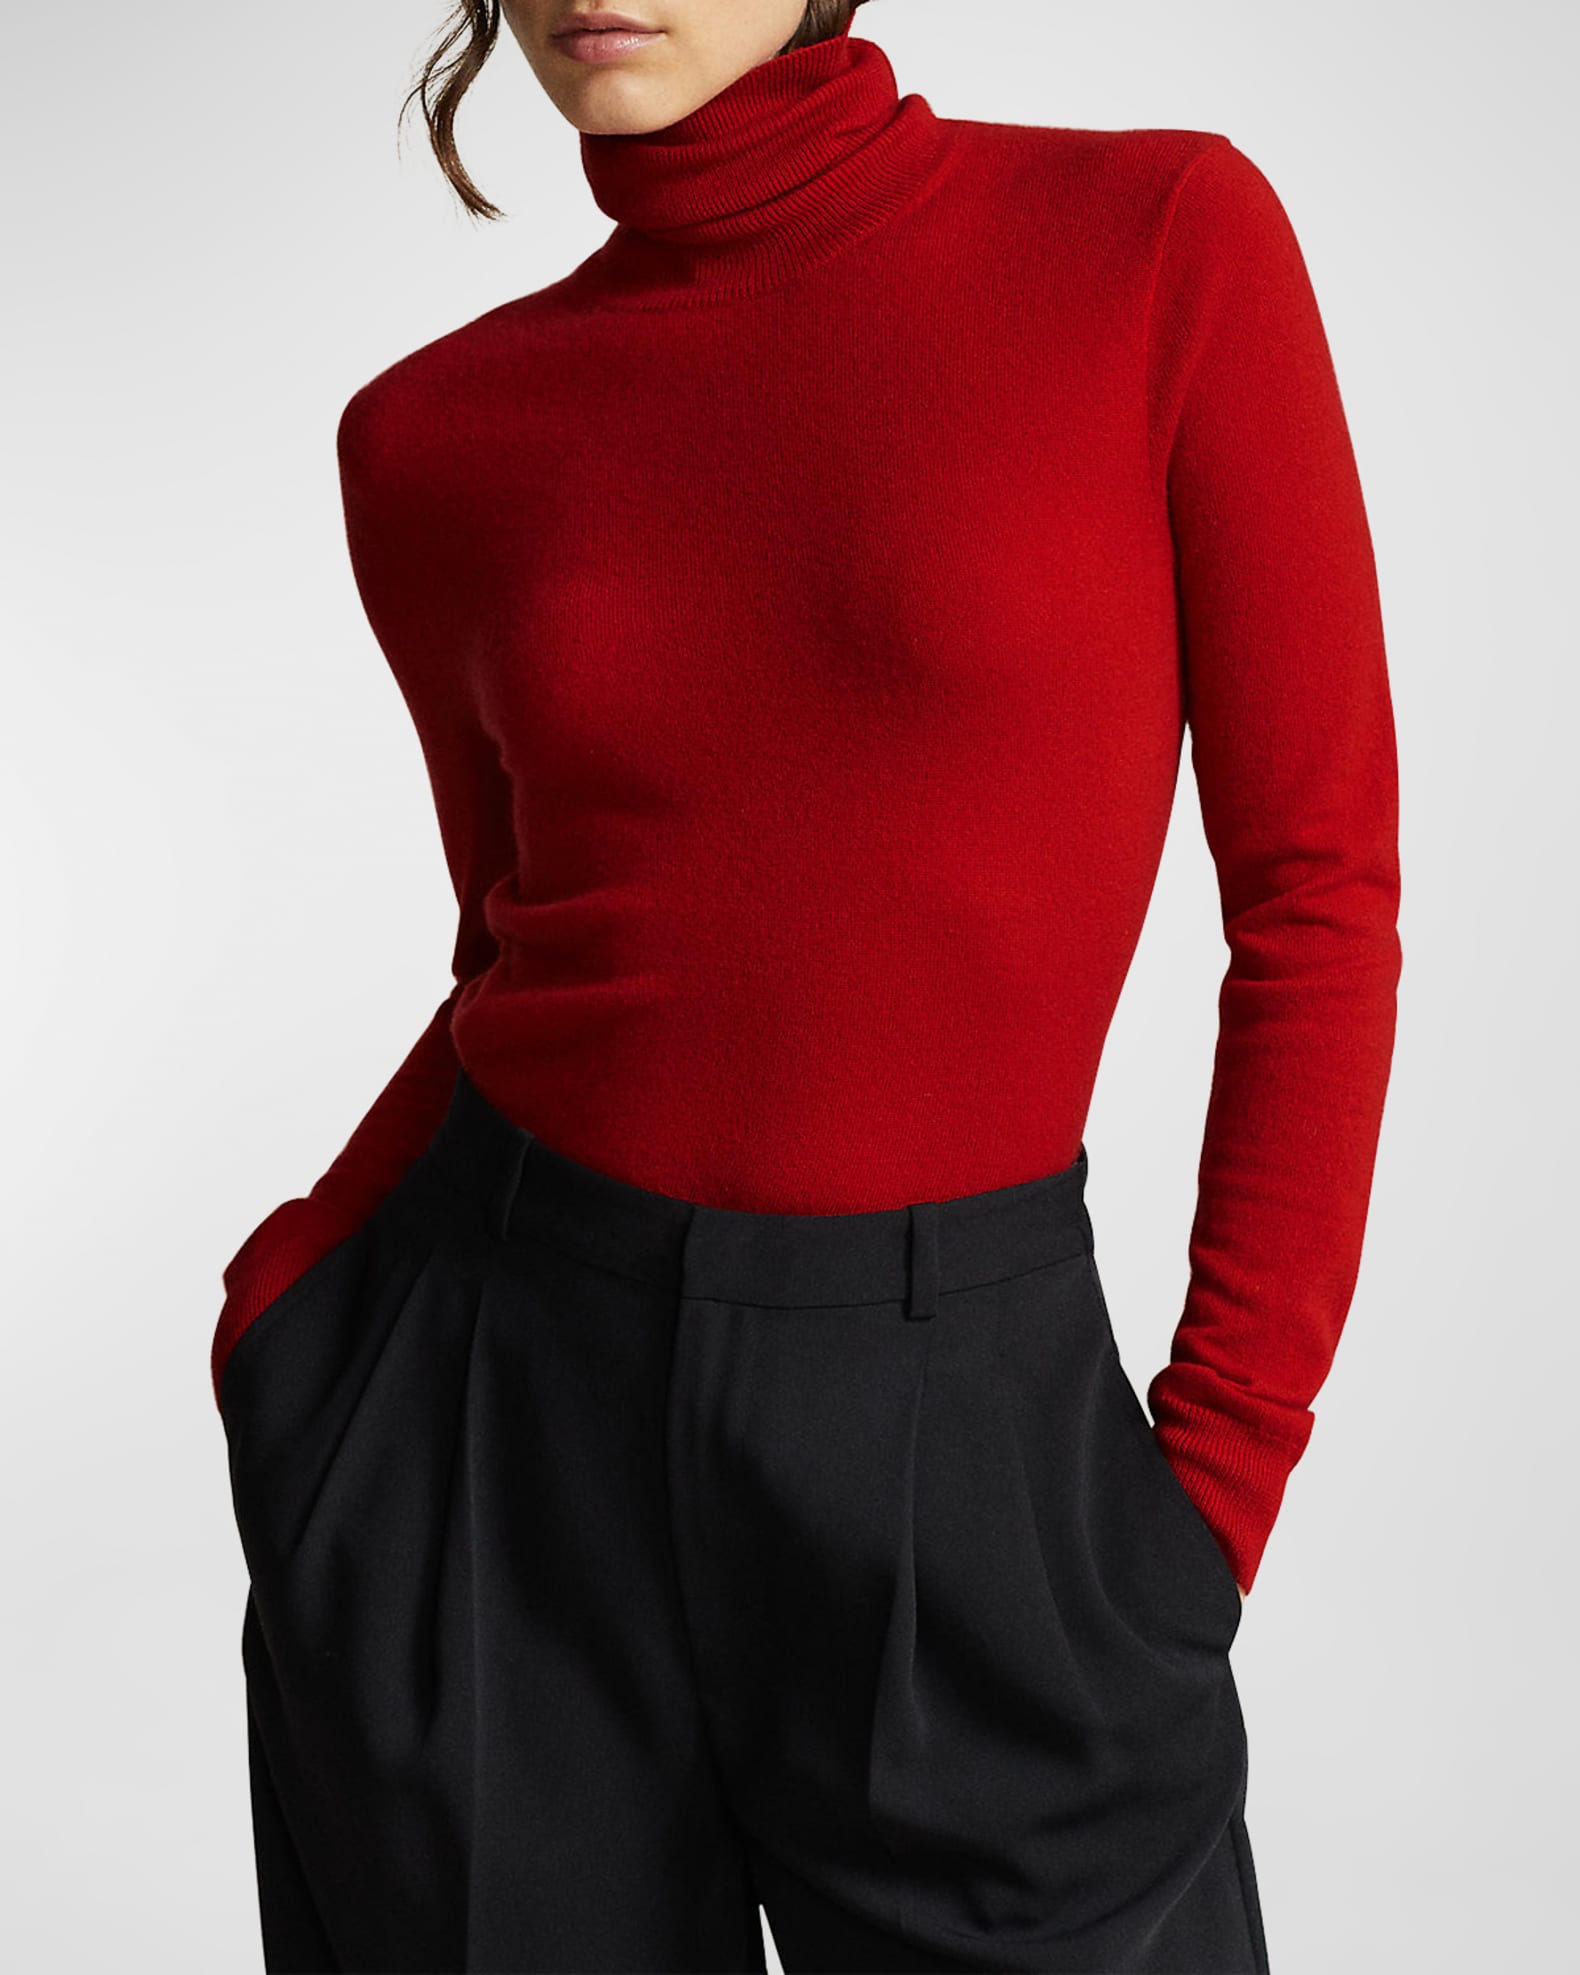 POLO RALPH LAUREN Womens Sweater 2X High Neck Wool Cashmere Mix Knit Red  Top NWT $99.99 - PicClick